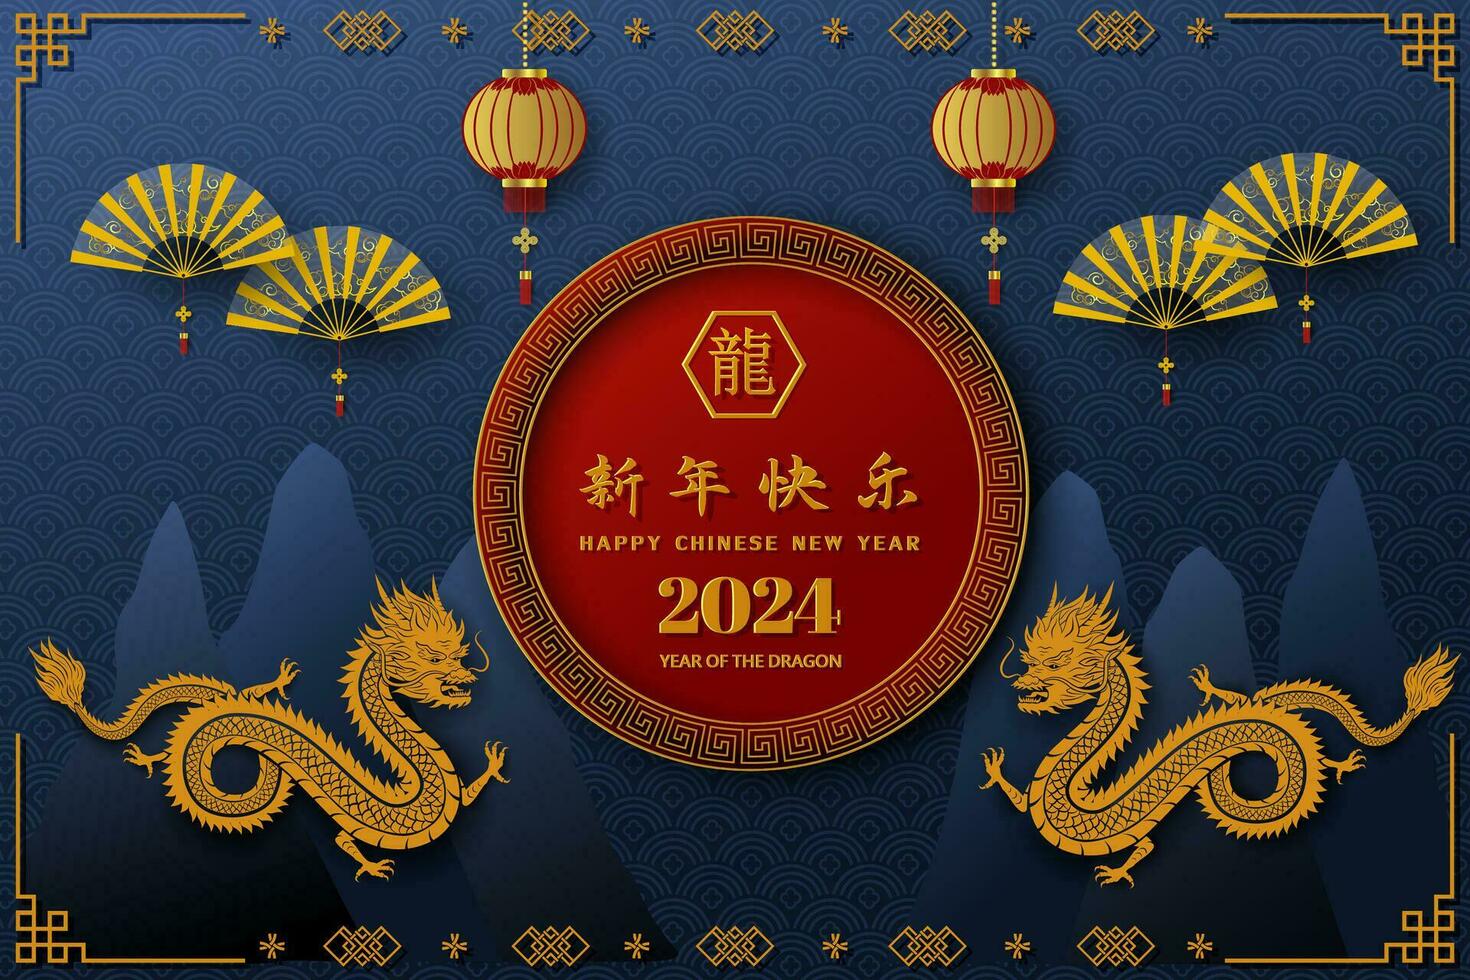 Happy Chinese new year 2024,dragon zodiac sign with asian elements on blue background,Chinese translate mean happy new year 2024 year of the dragon vector